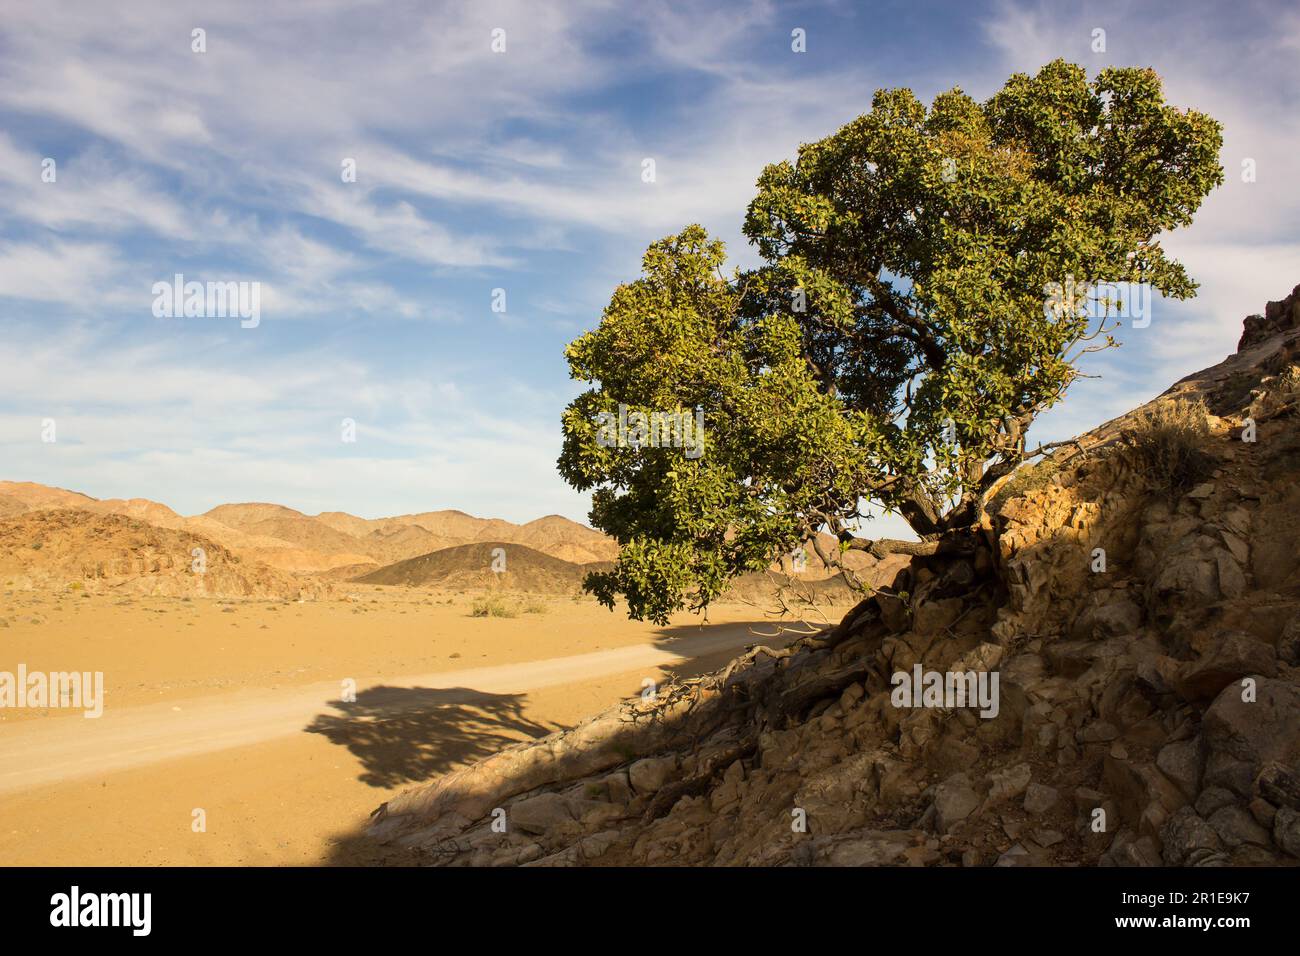 A single tree thriving in a rocky desert landscape Stock Photo